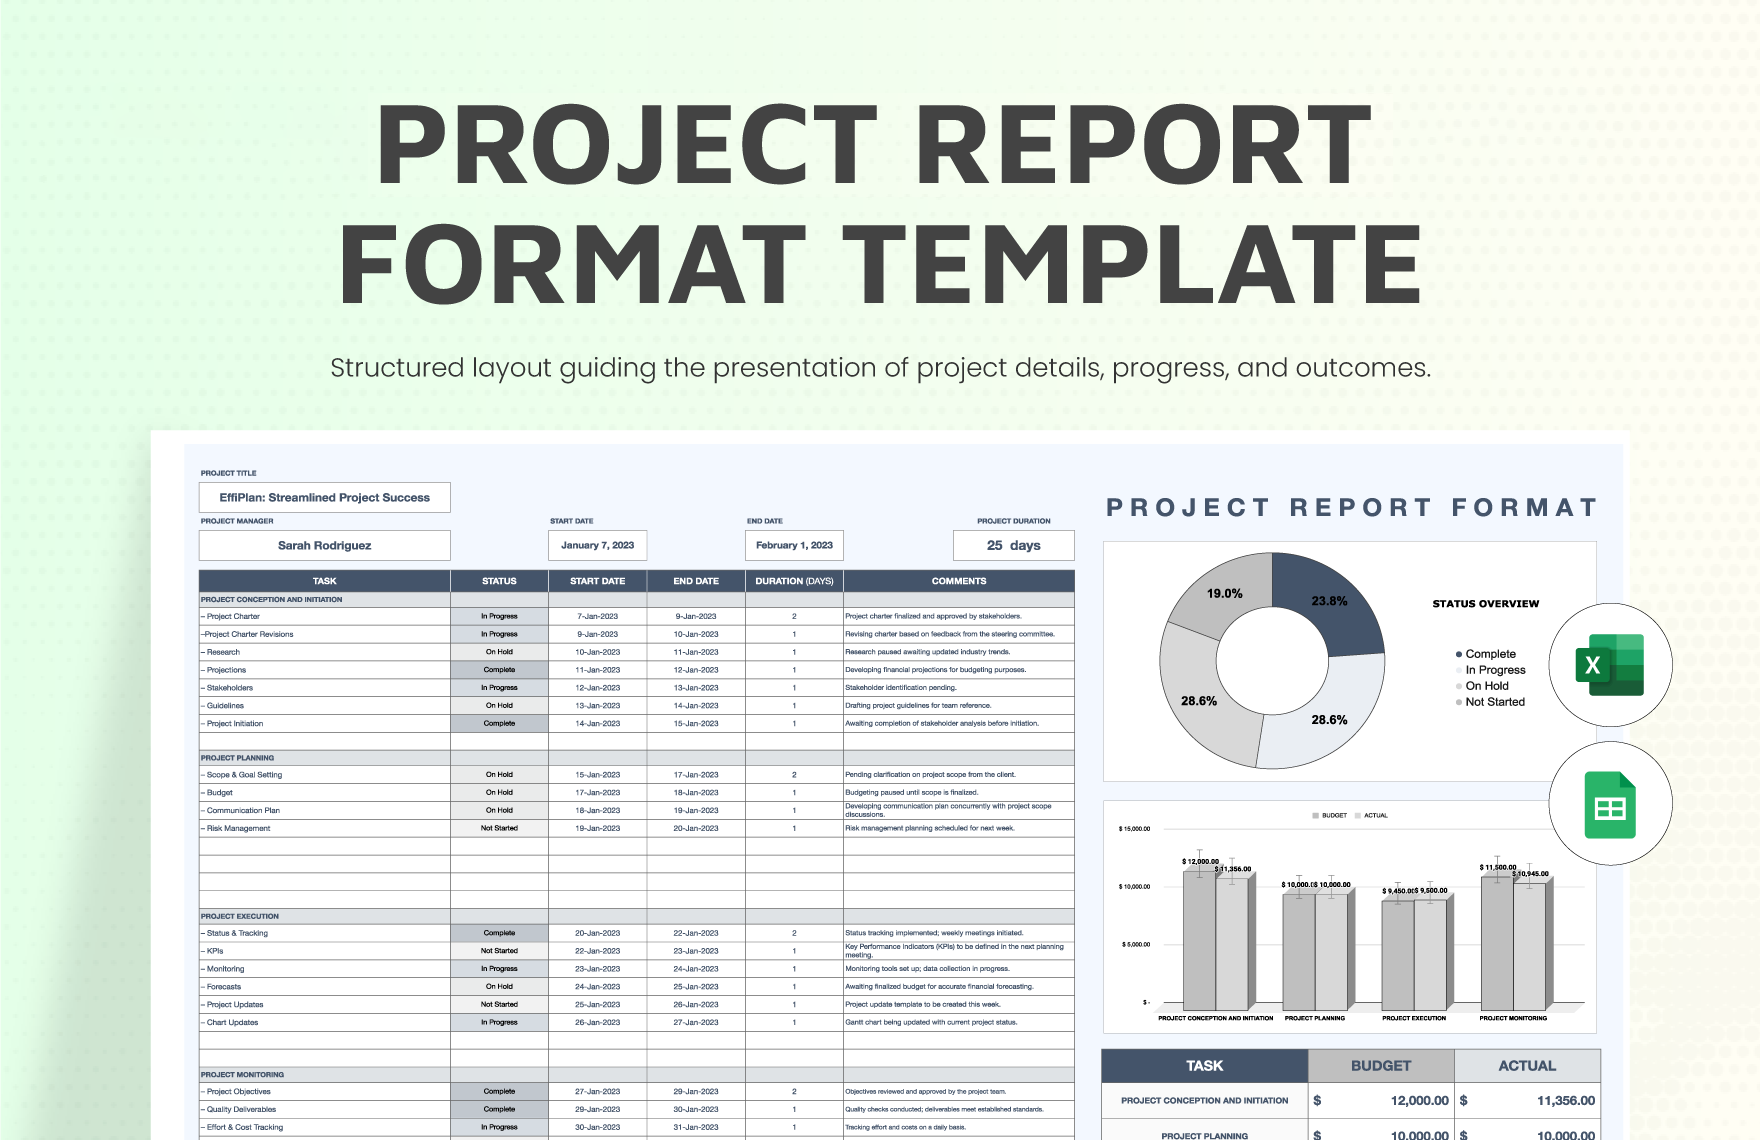 Free Project Report Format Template in Excel, Google Sheets